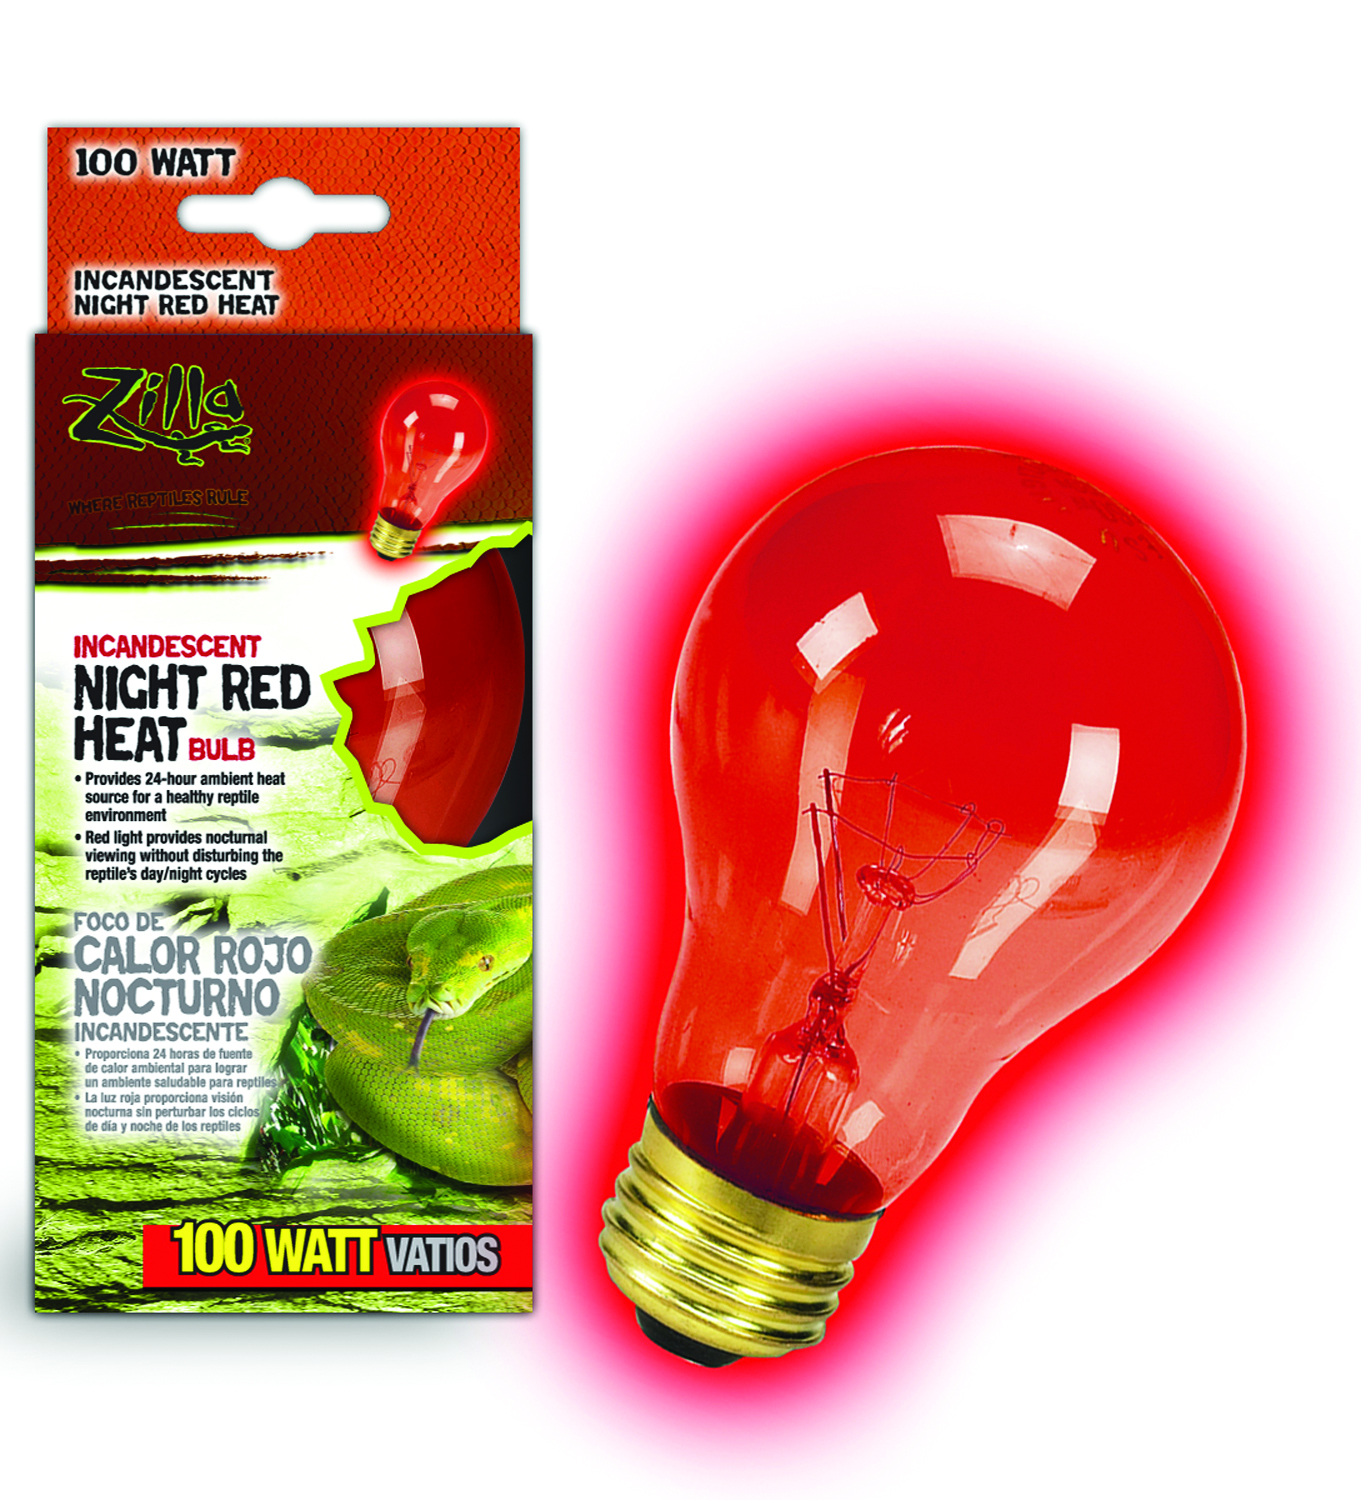 NIGHT RED INCANDESCENT BULB